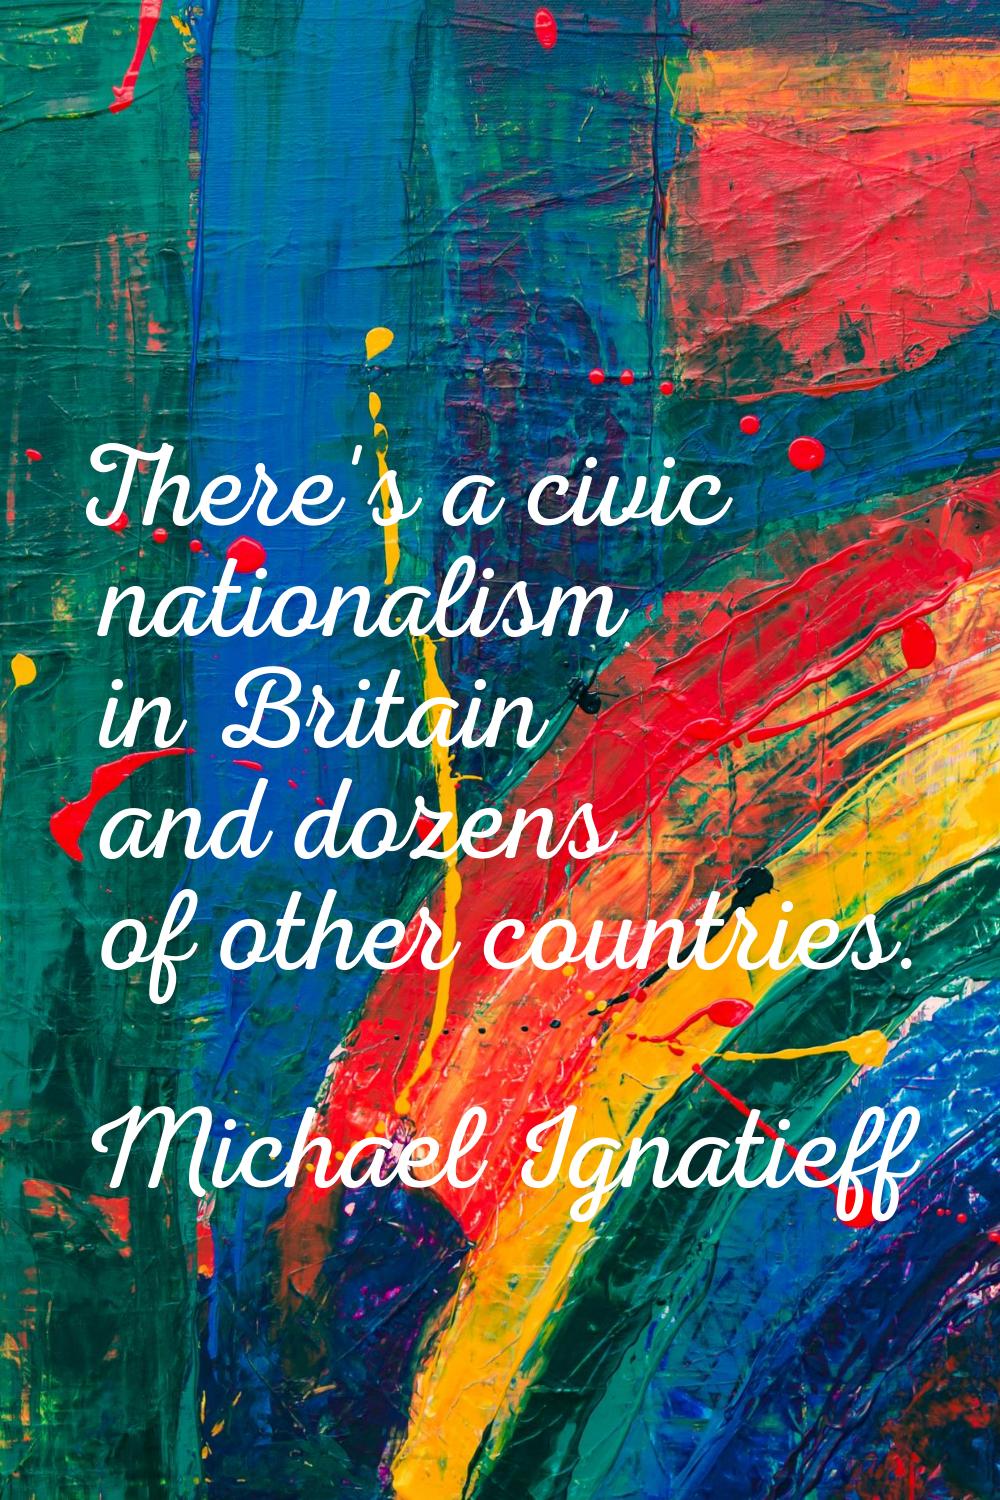 There's a civic nationalism in Britain and dozens of other countries.